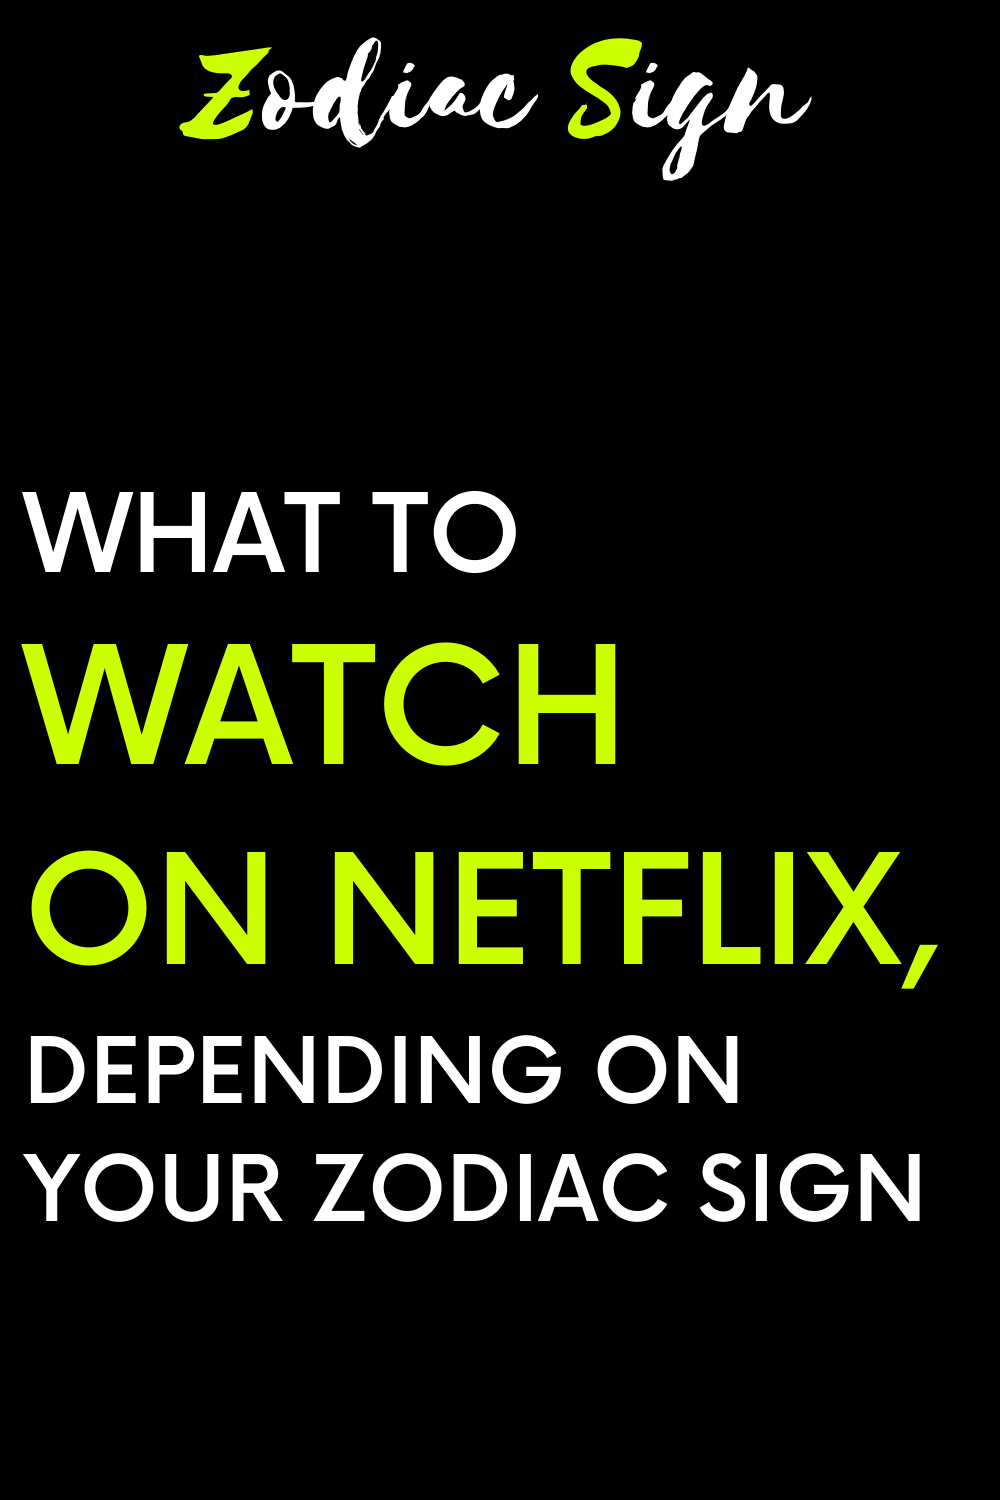 What to watch on Netflix, depending on your zodiac sign